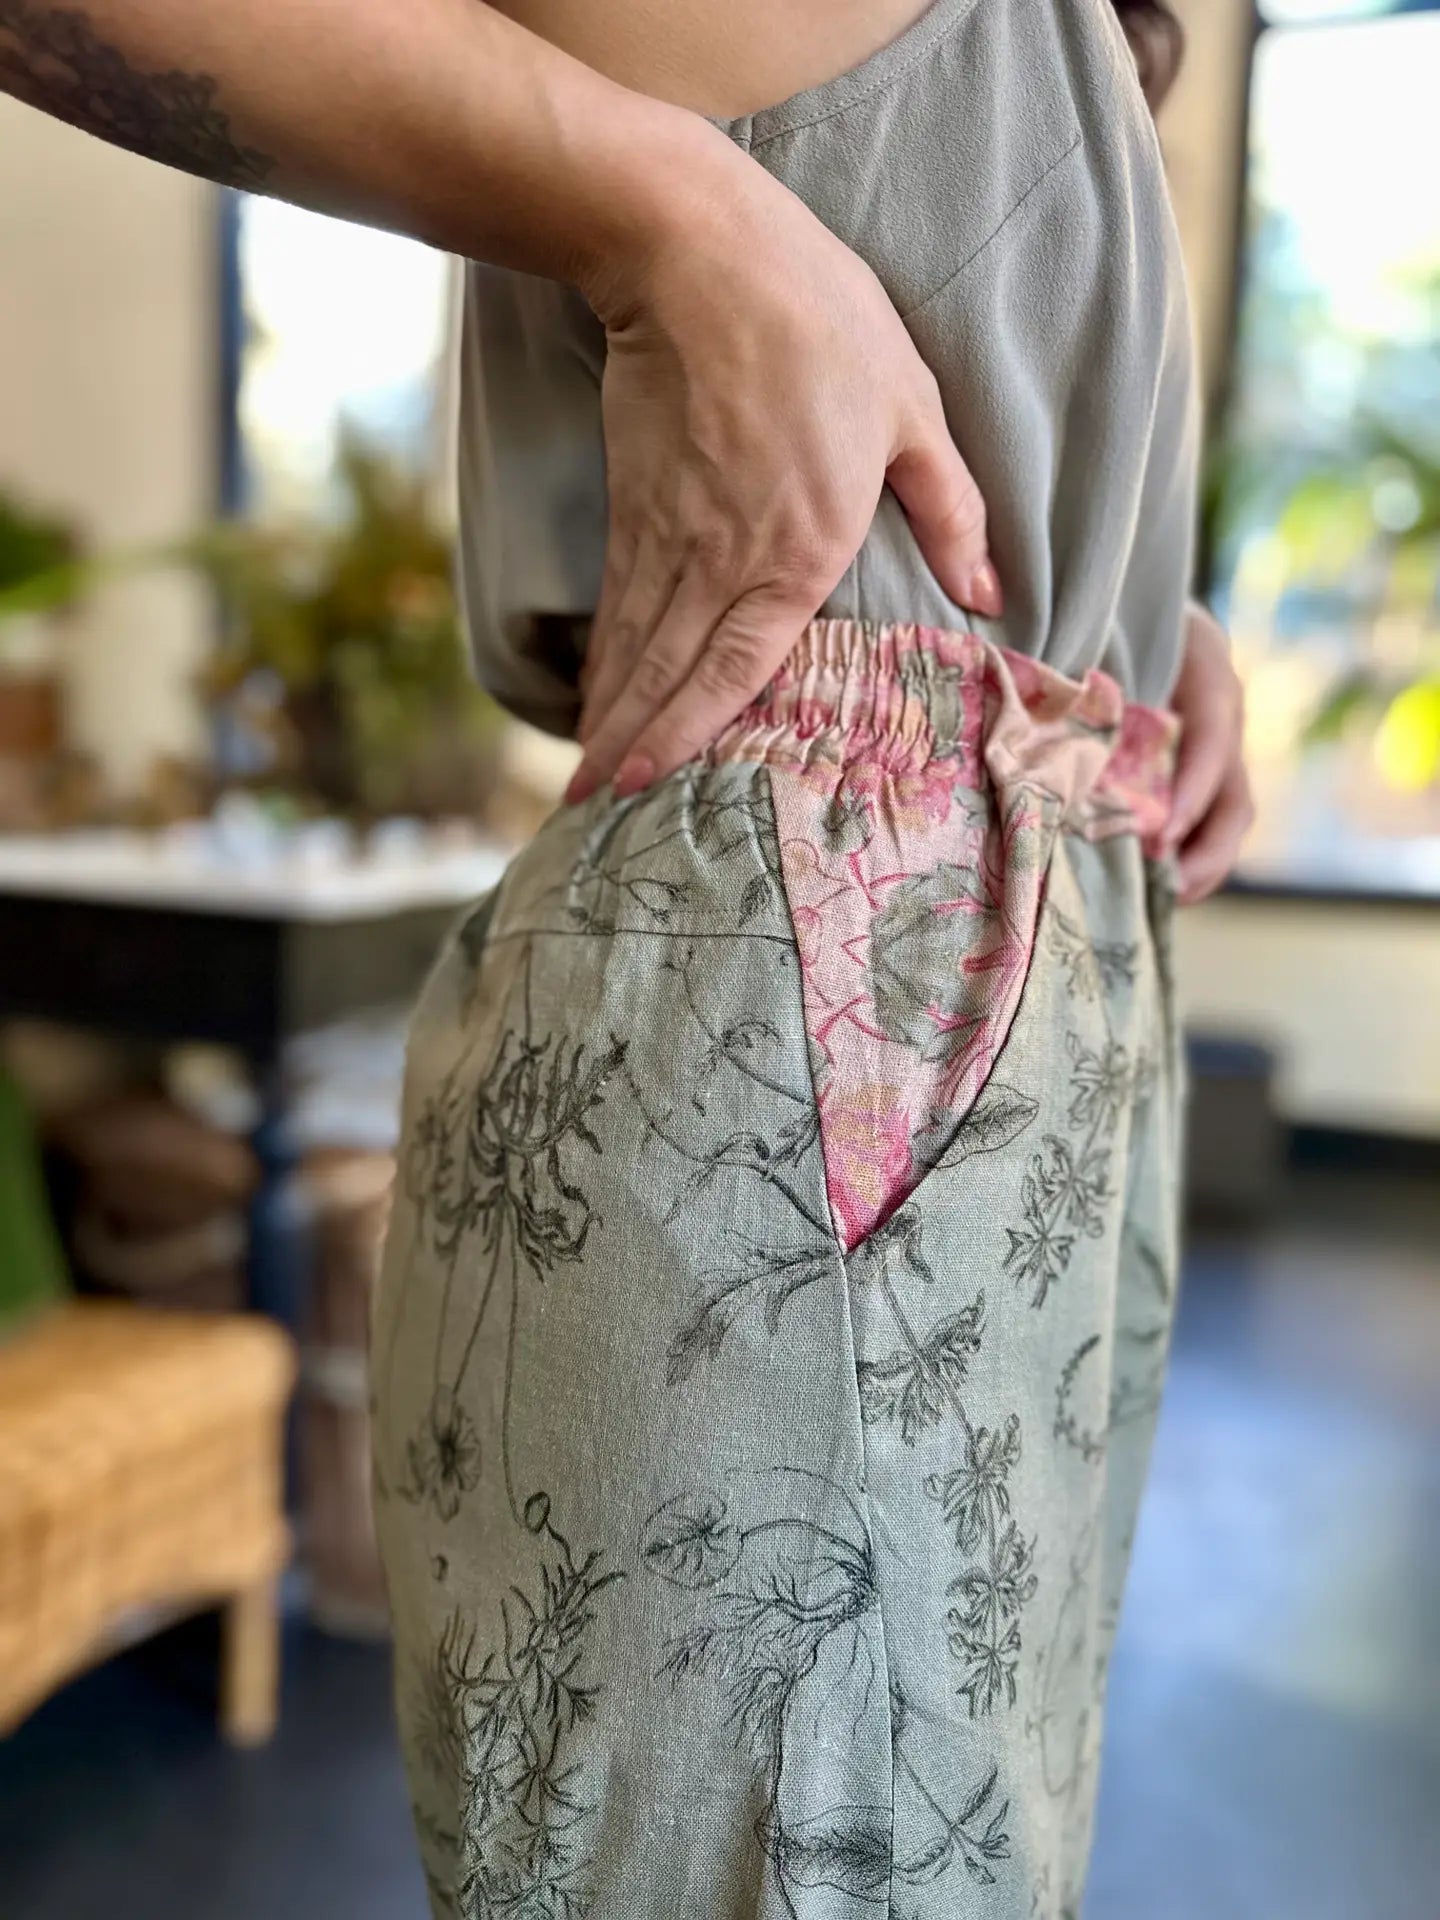 Market of Stars Map of My Heart Printed Boho Artist Pants in Sage side pocket view - Style Society Marketplace